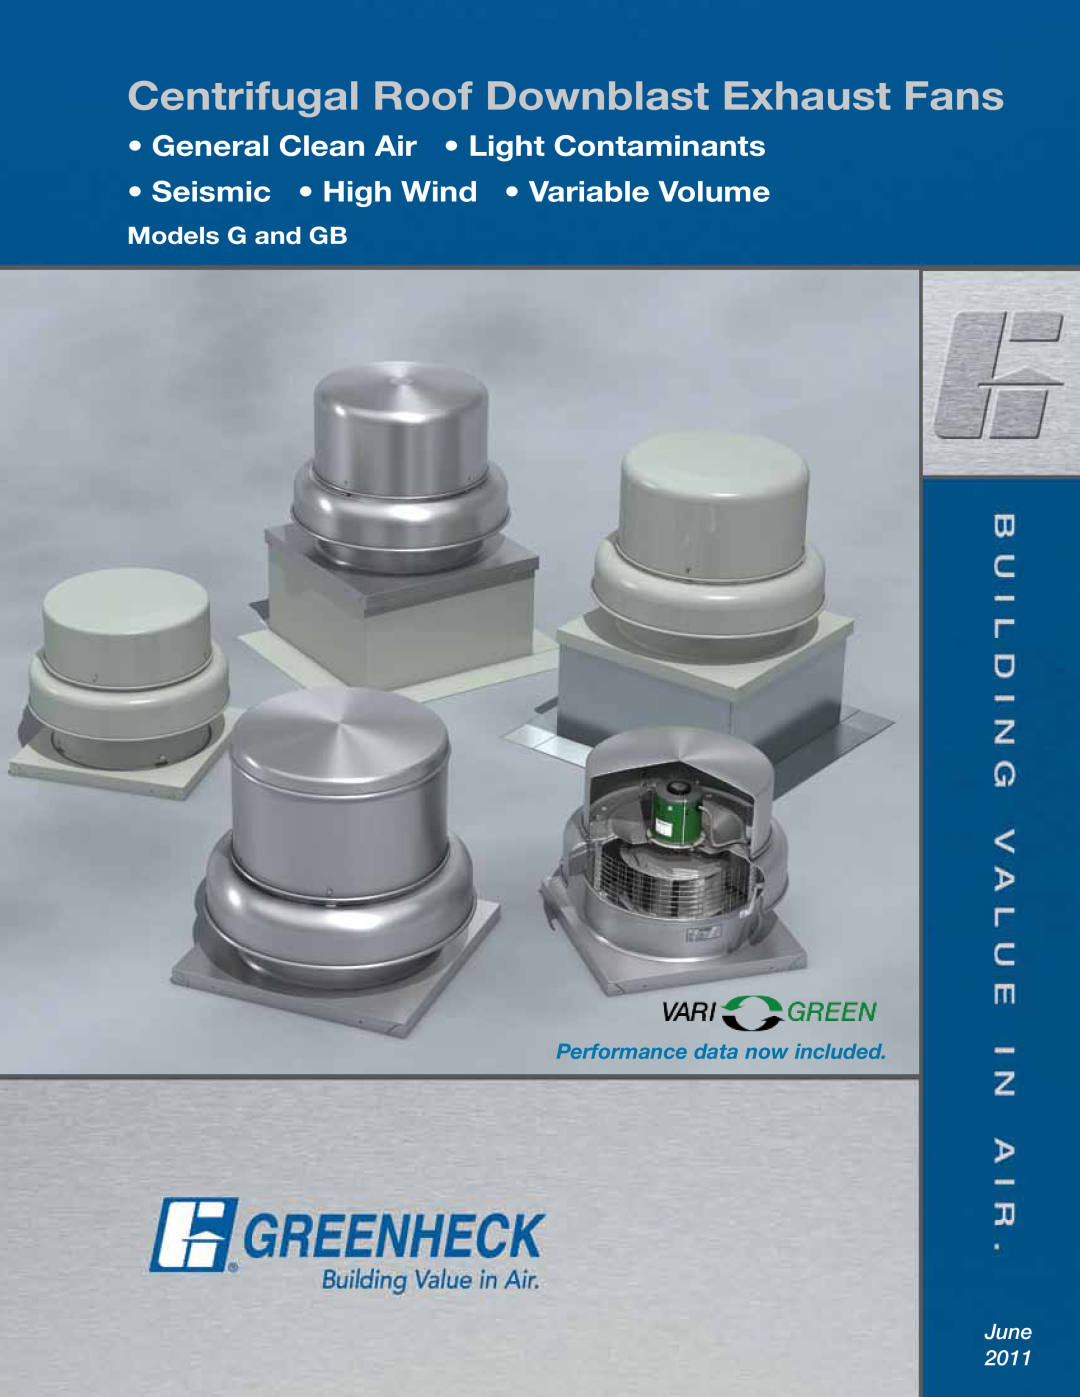 Greenheck Fan manual Centrifugal Roof Downblast Exhaust Fans, General Clean Air Light Contaminants, Models G and GB 